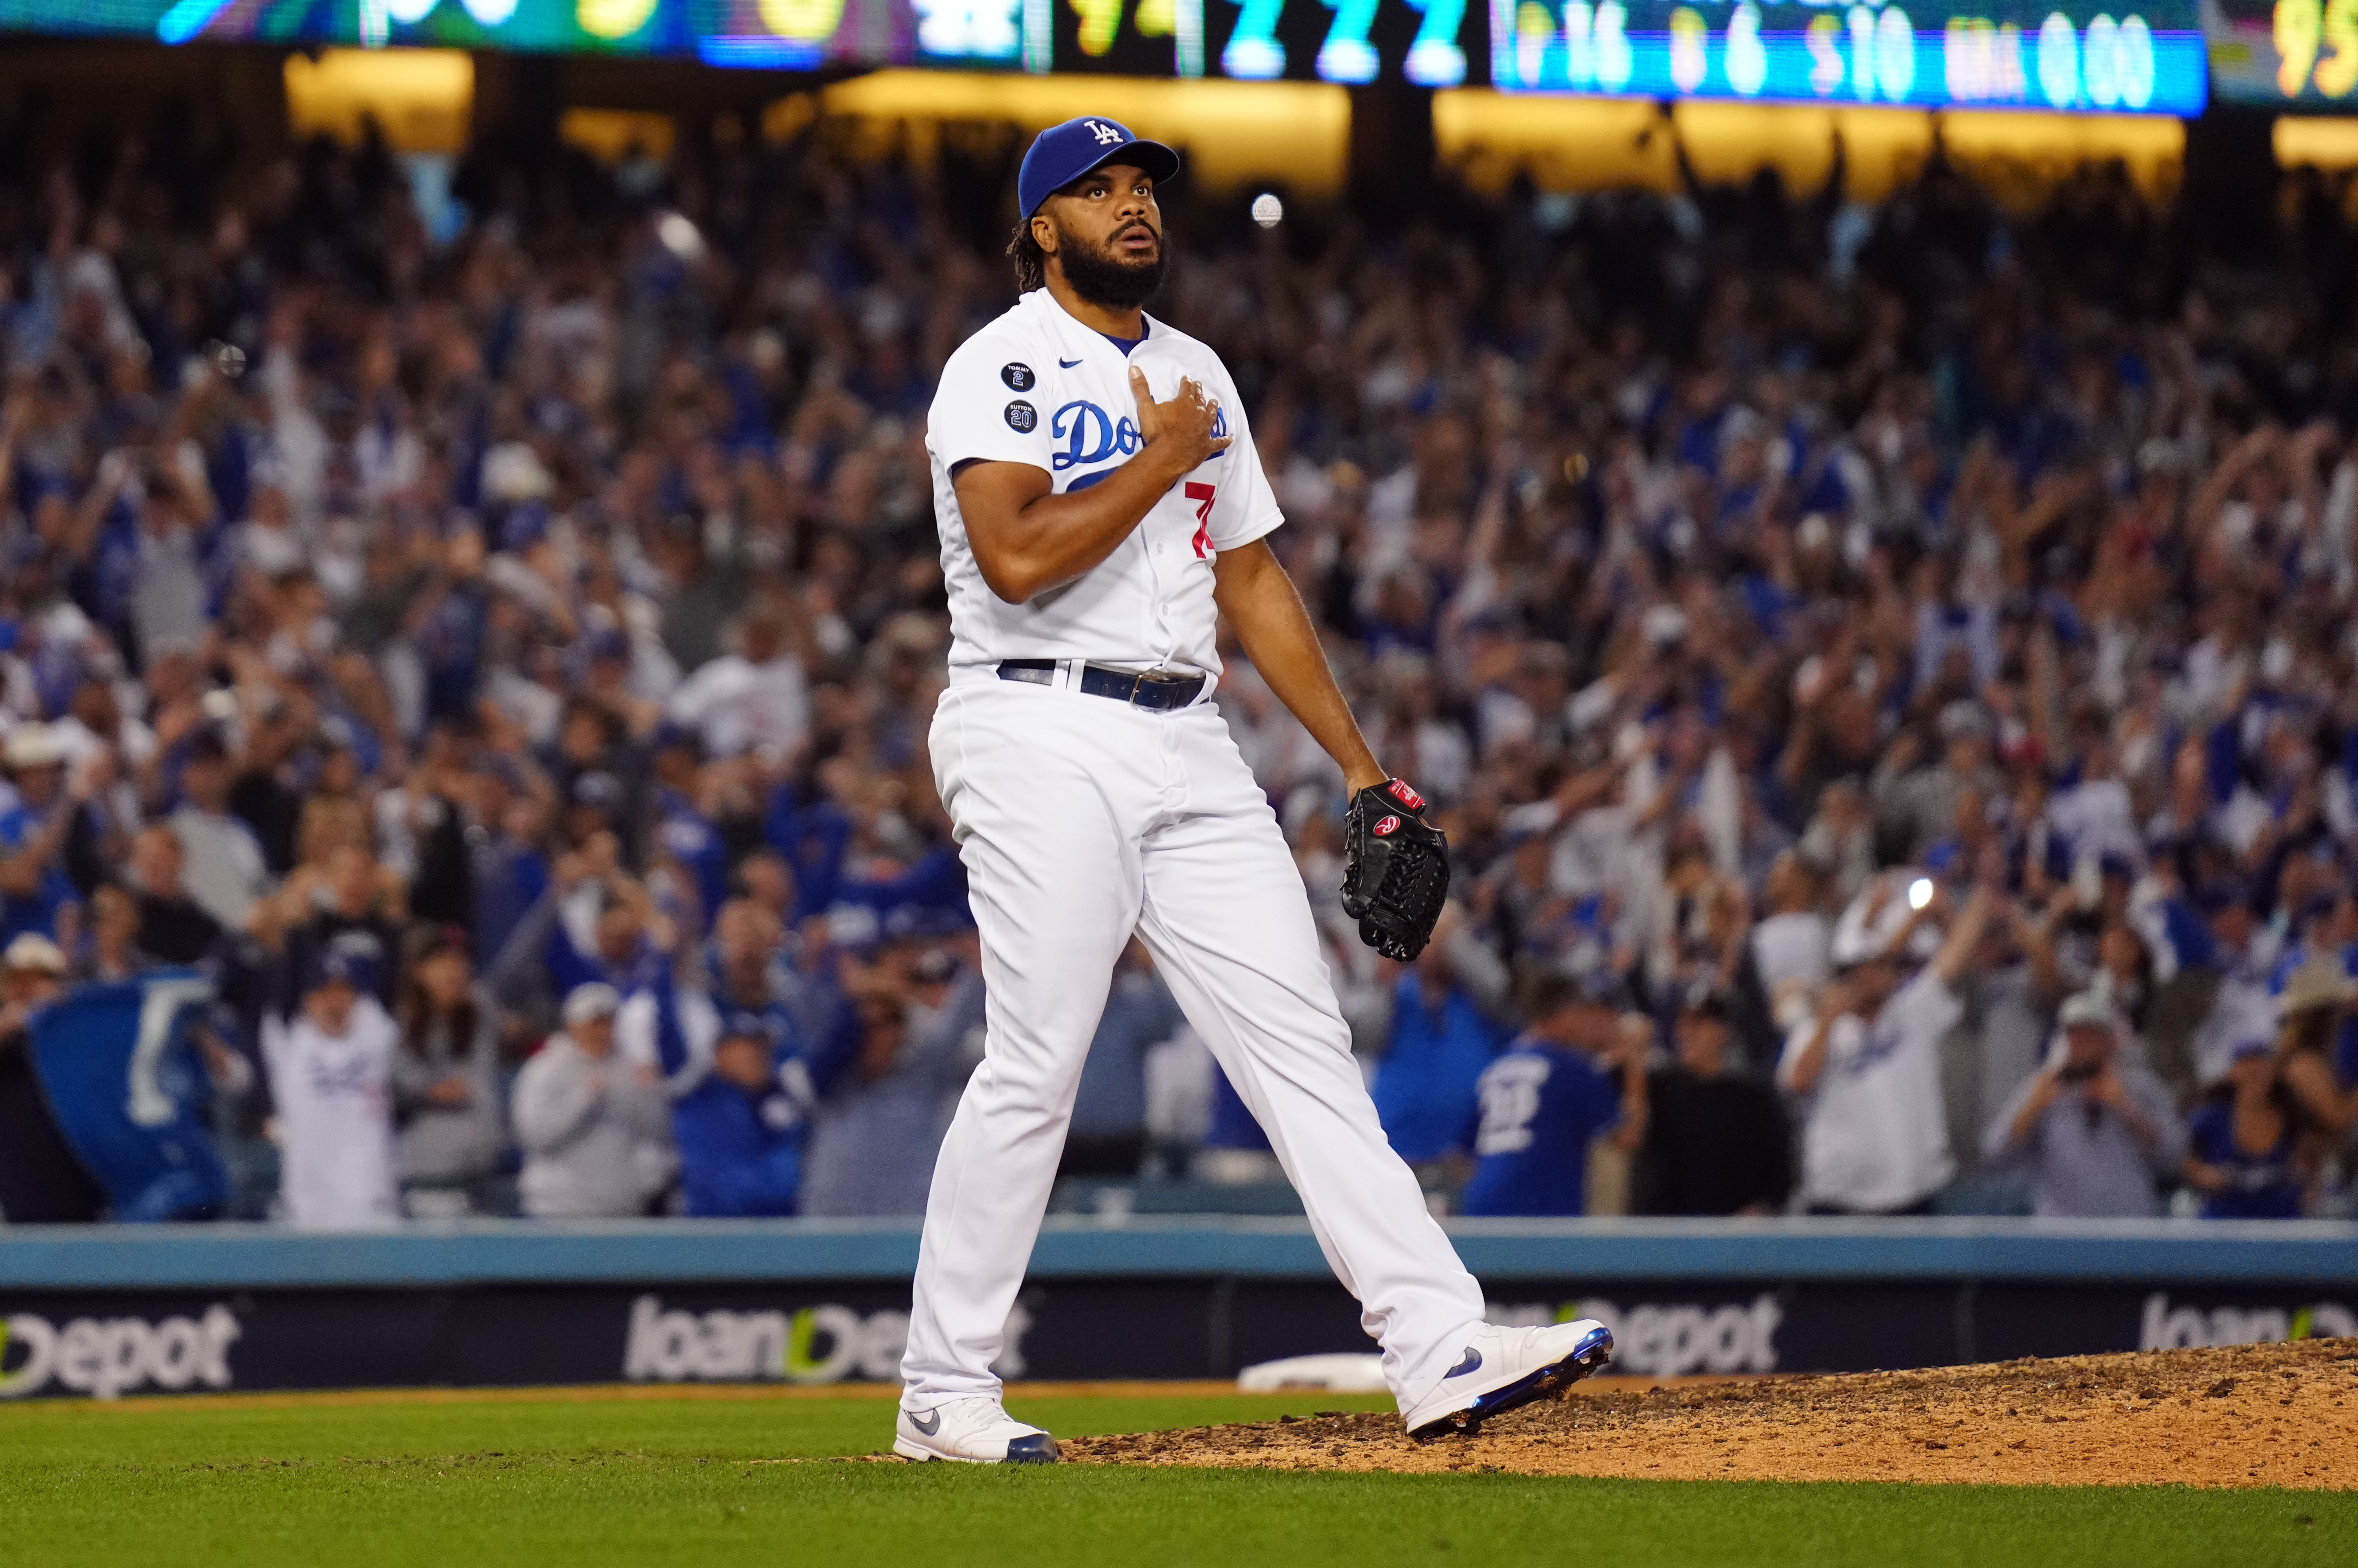 Kenley Jansen is headed to his fourth All-Star game as the lone